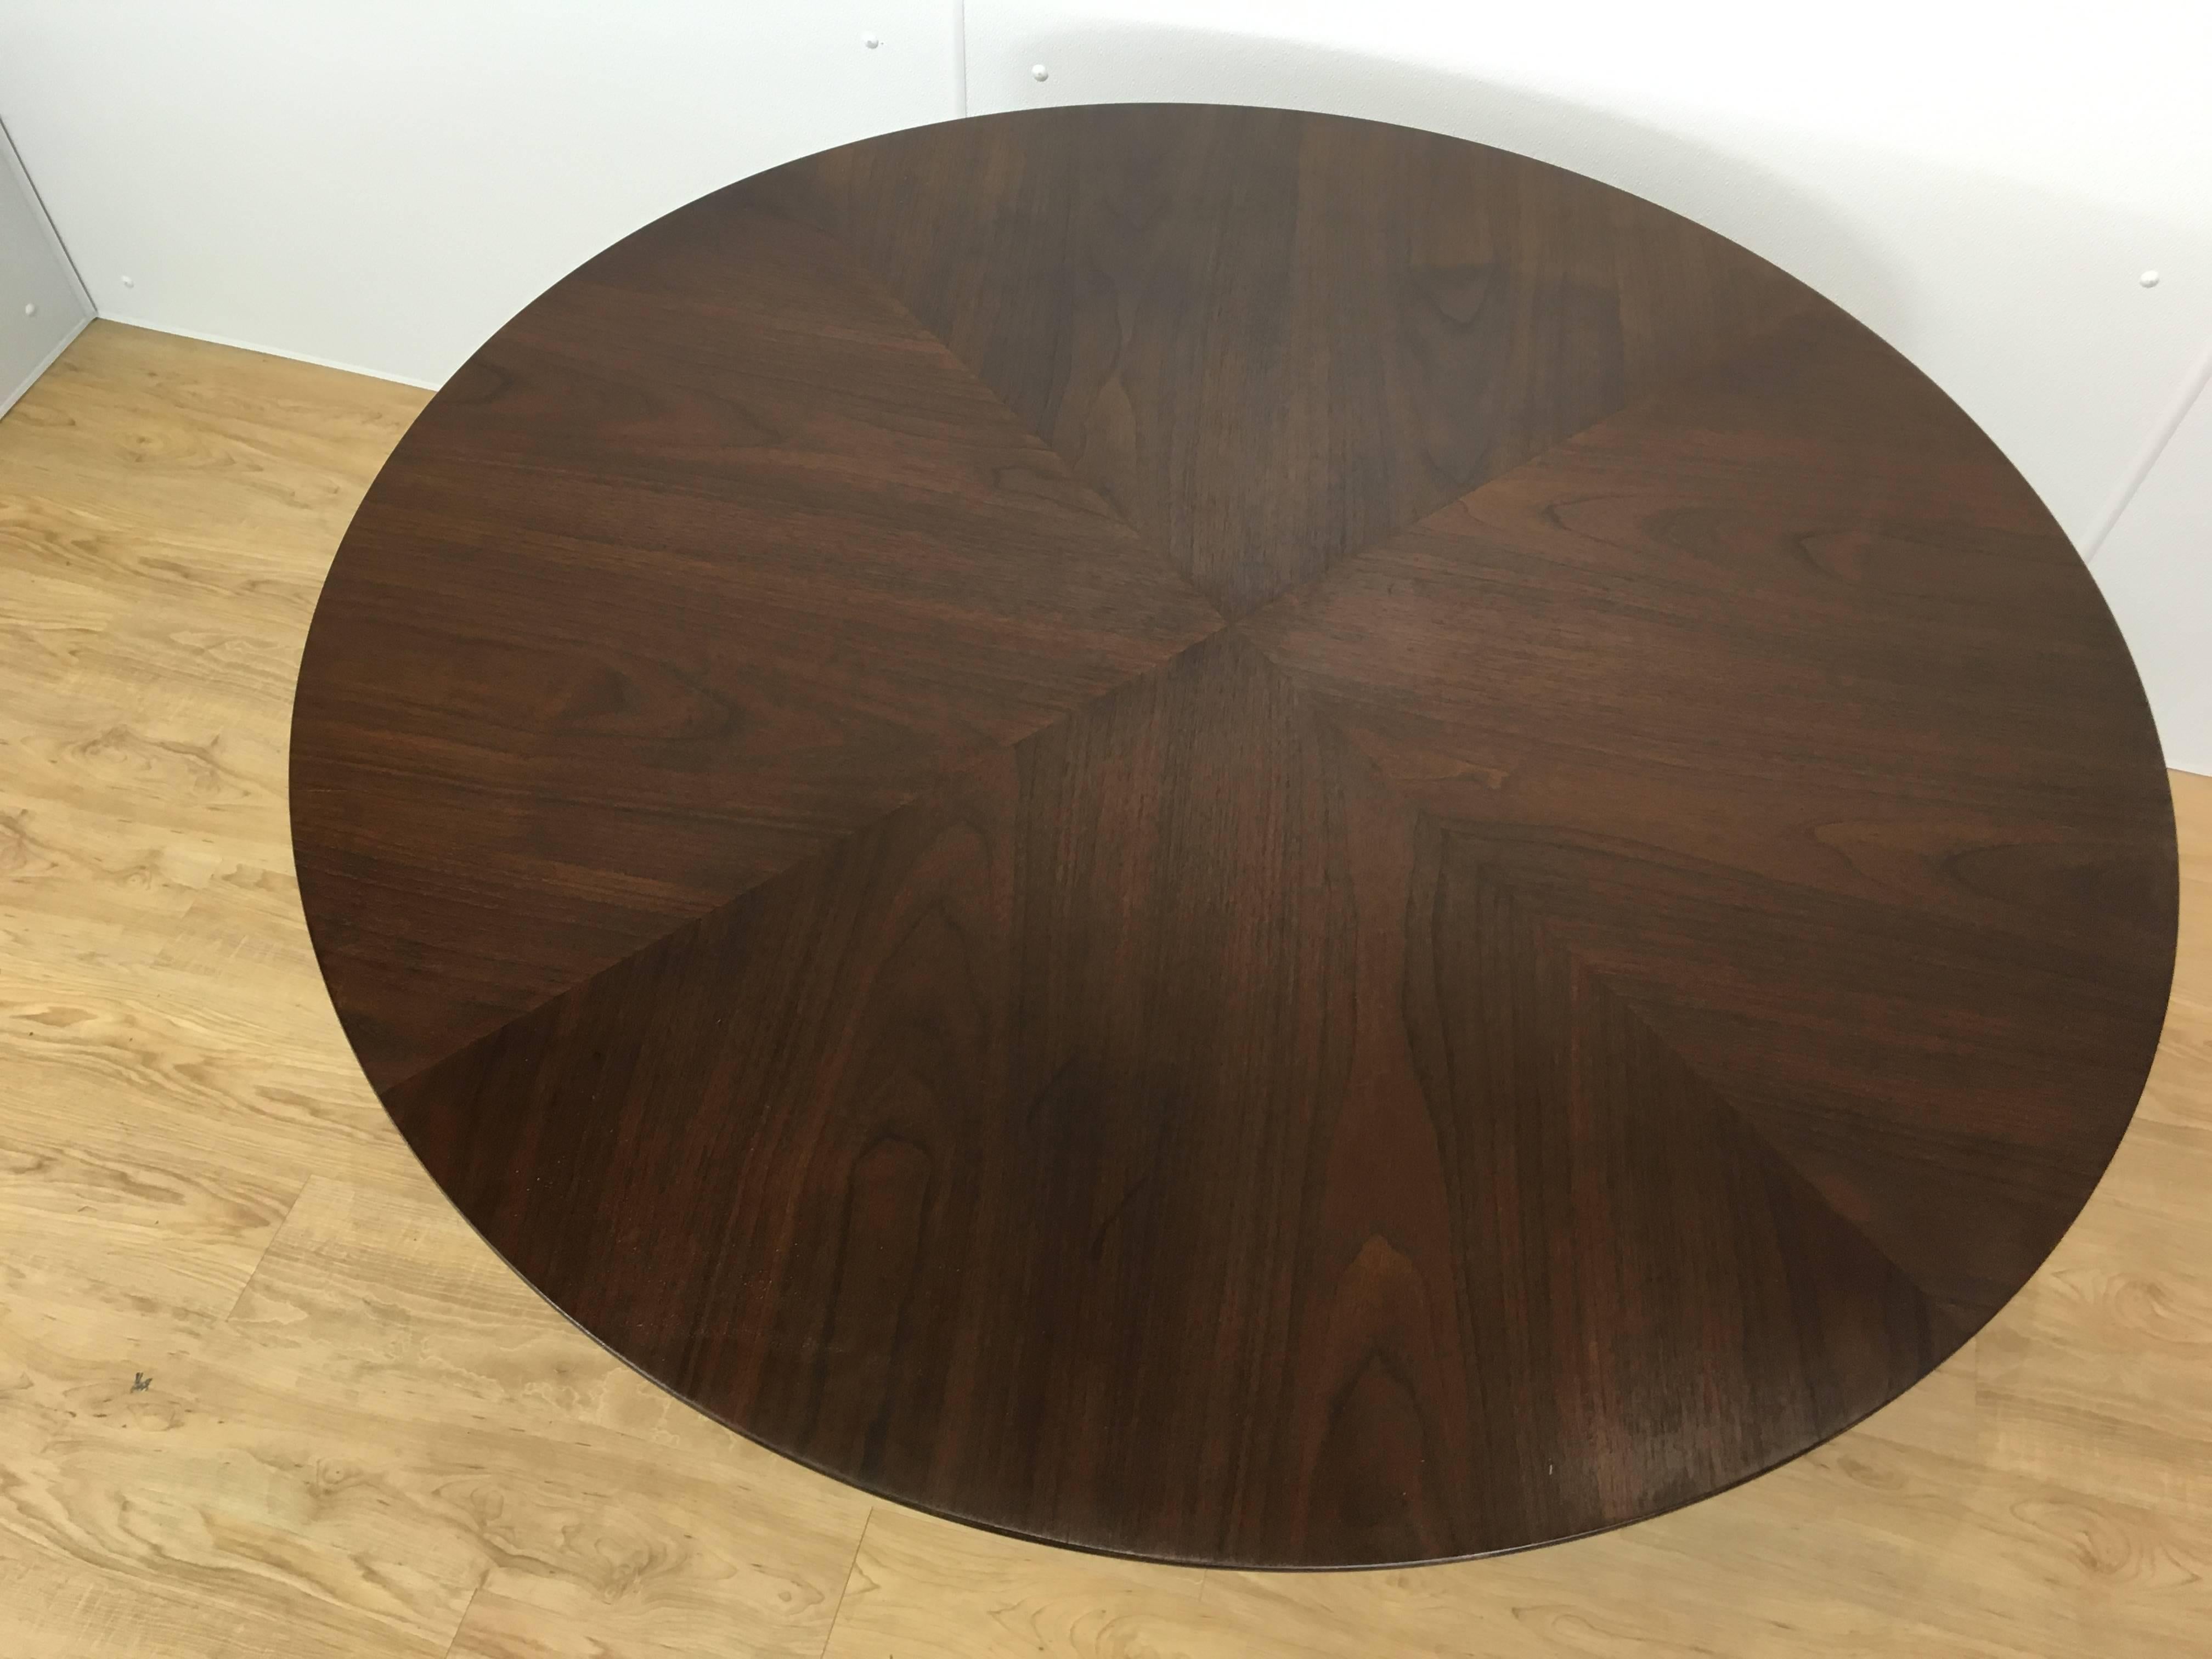 Early KNOLL Tulip Rosewood Dining Table, with beautiful figured bookmatched 48 inch sectioned circular top, on a typical white enameled pedestal base.